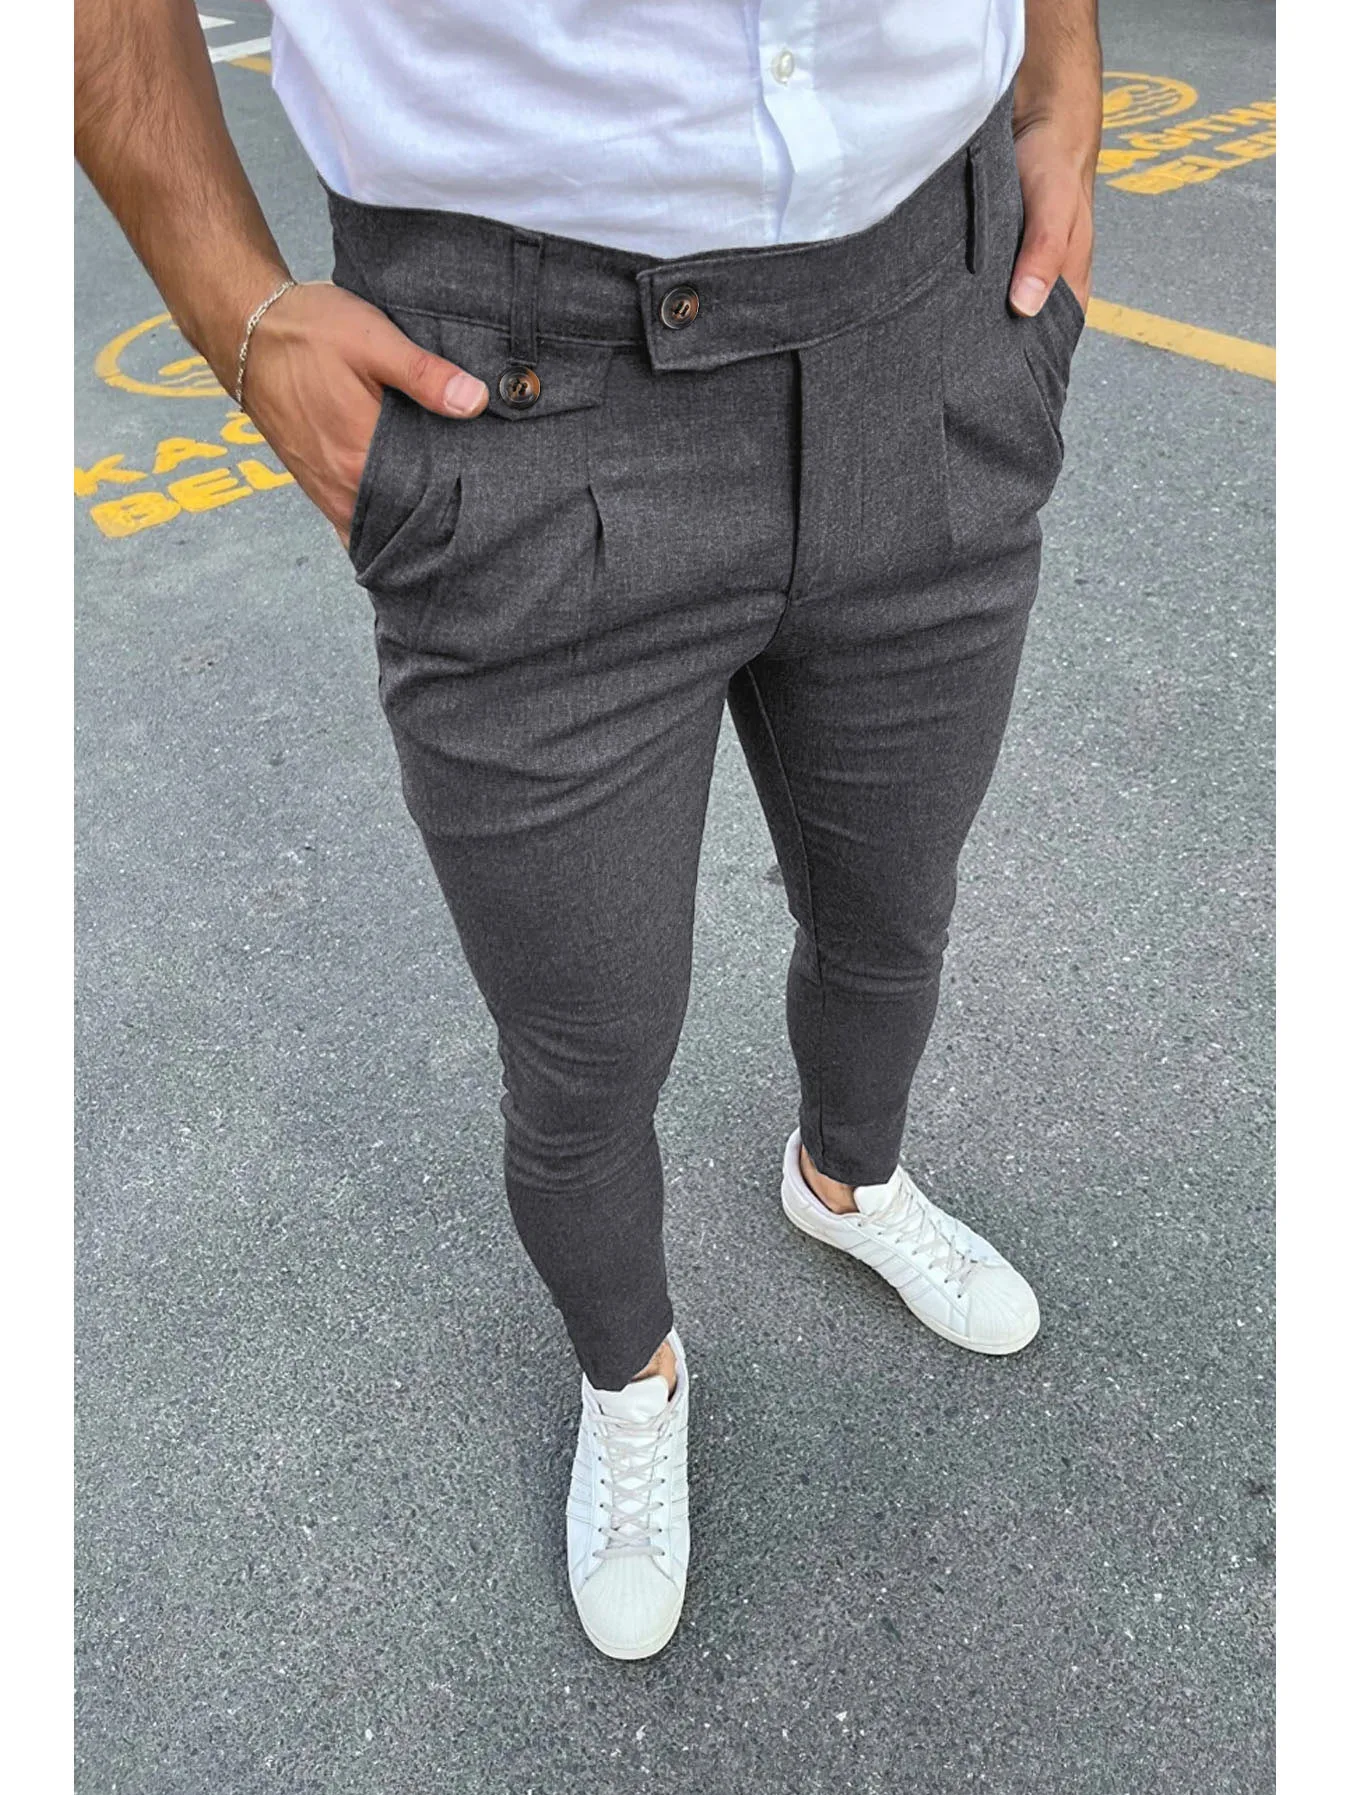 2023 New Men's Casual Pants Fashion Solid Business Leisure Trousers Trend Cool Street Wear Office Pencil Pants Calças Masculinas 3